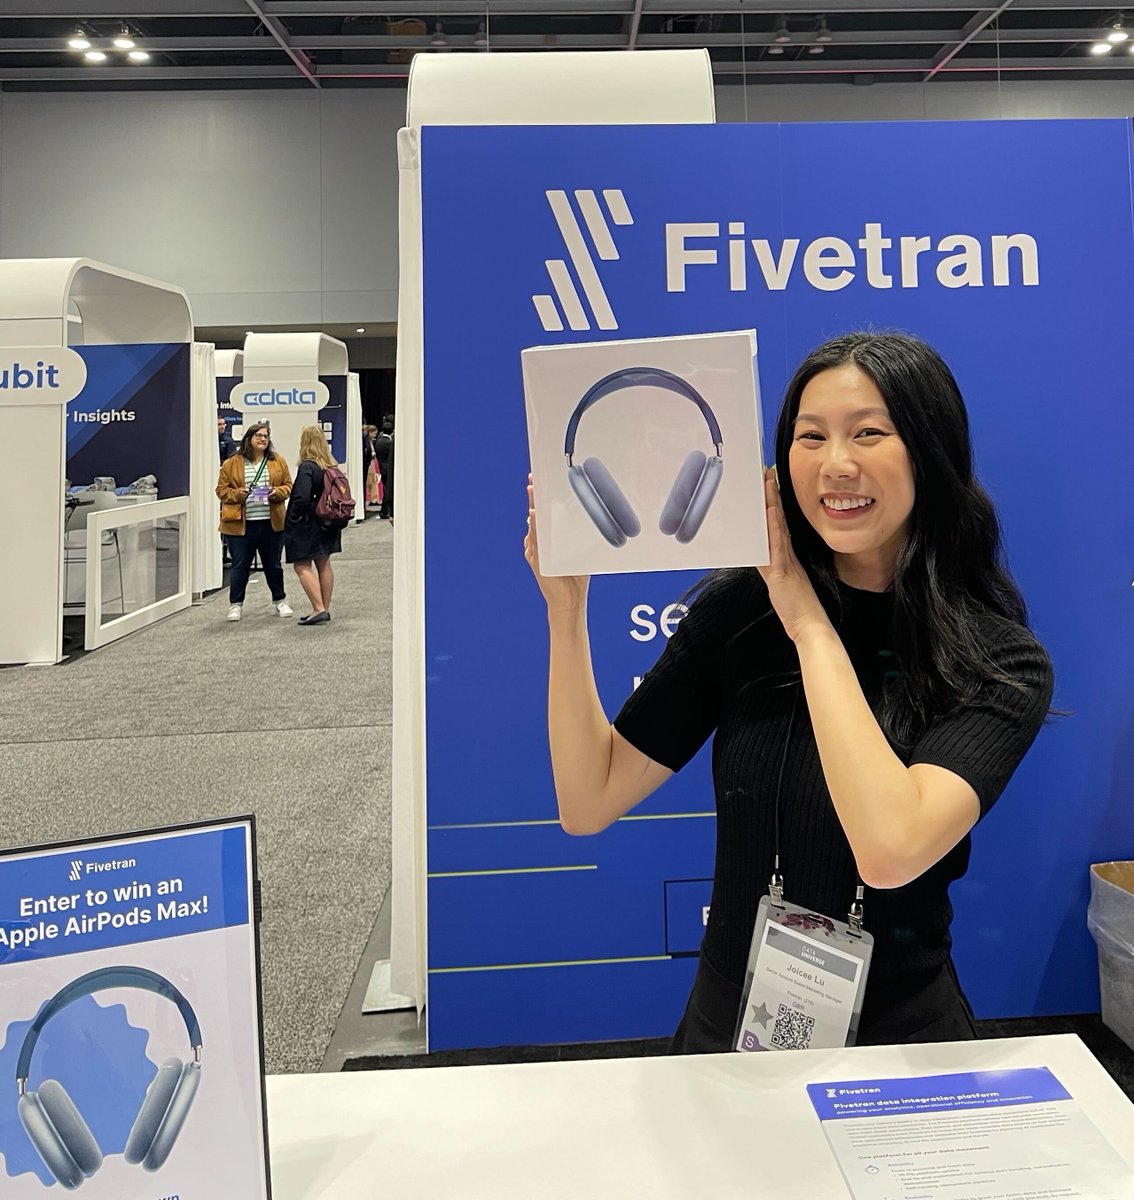 Attention data enthusiasts! If you're at #DataUniverse, make sure to stop by the Fivetran Booth #213. We're raffling off a pair of Apple AirPods Max, and you could be the lucky winner. 🎧 Don't miss out on the opportunity to chat with our team and enter to win this amazing prize.